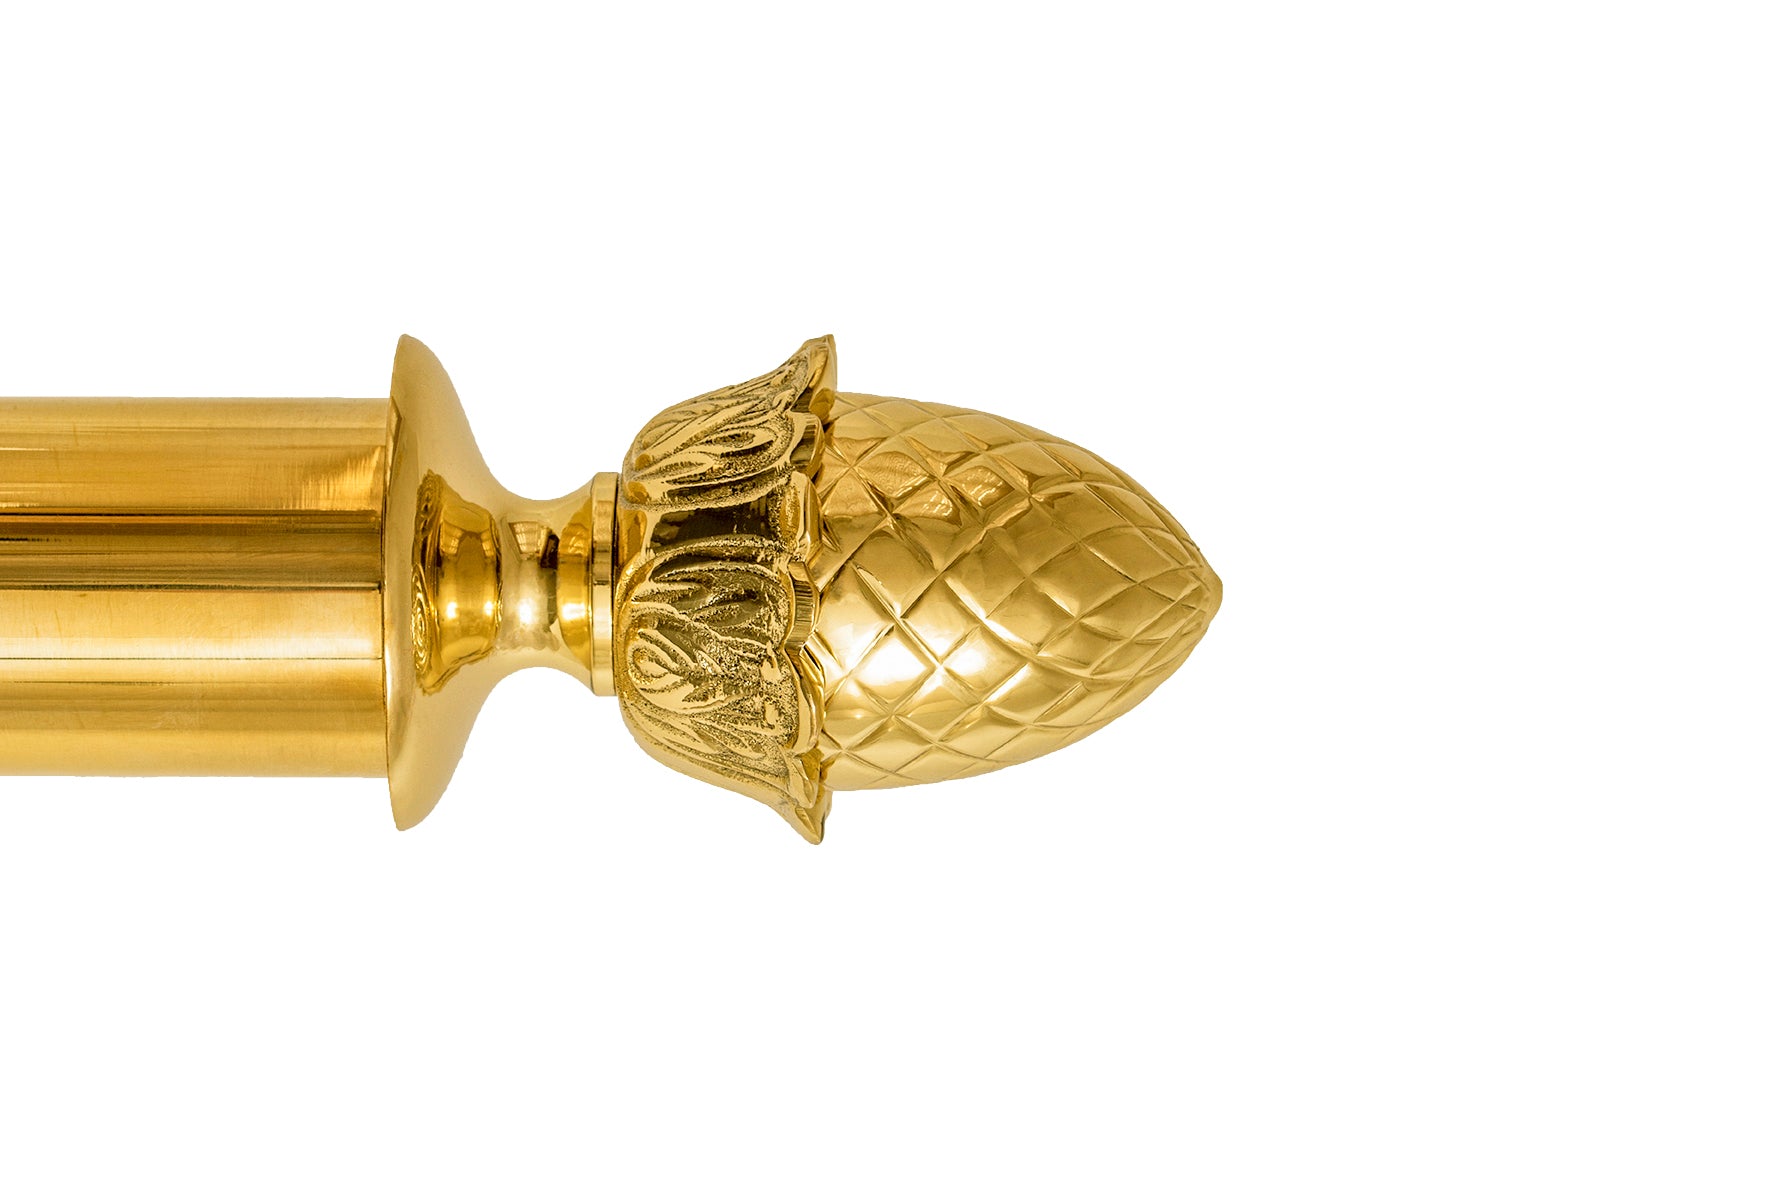 Tillys Classic Pineapple Finial Curtain Pole Set in Polished Brass